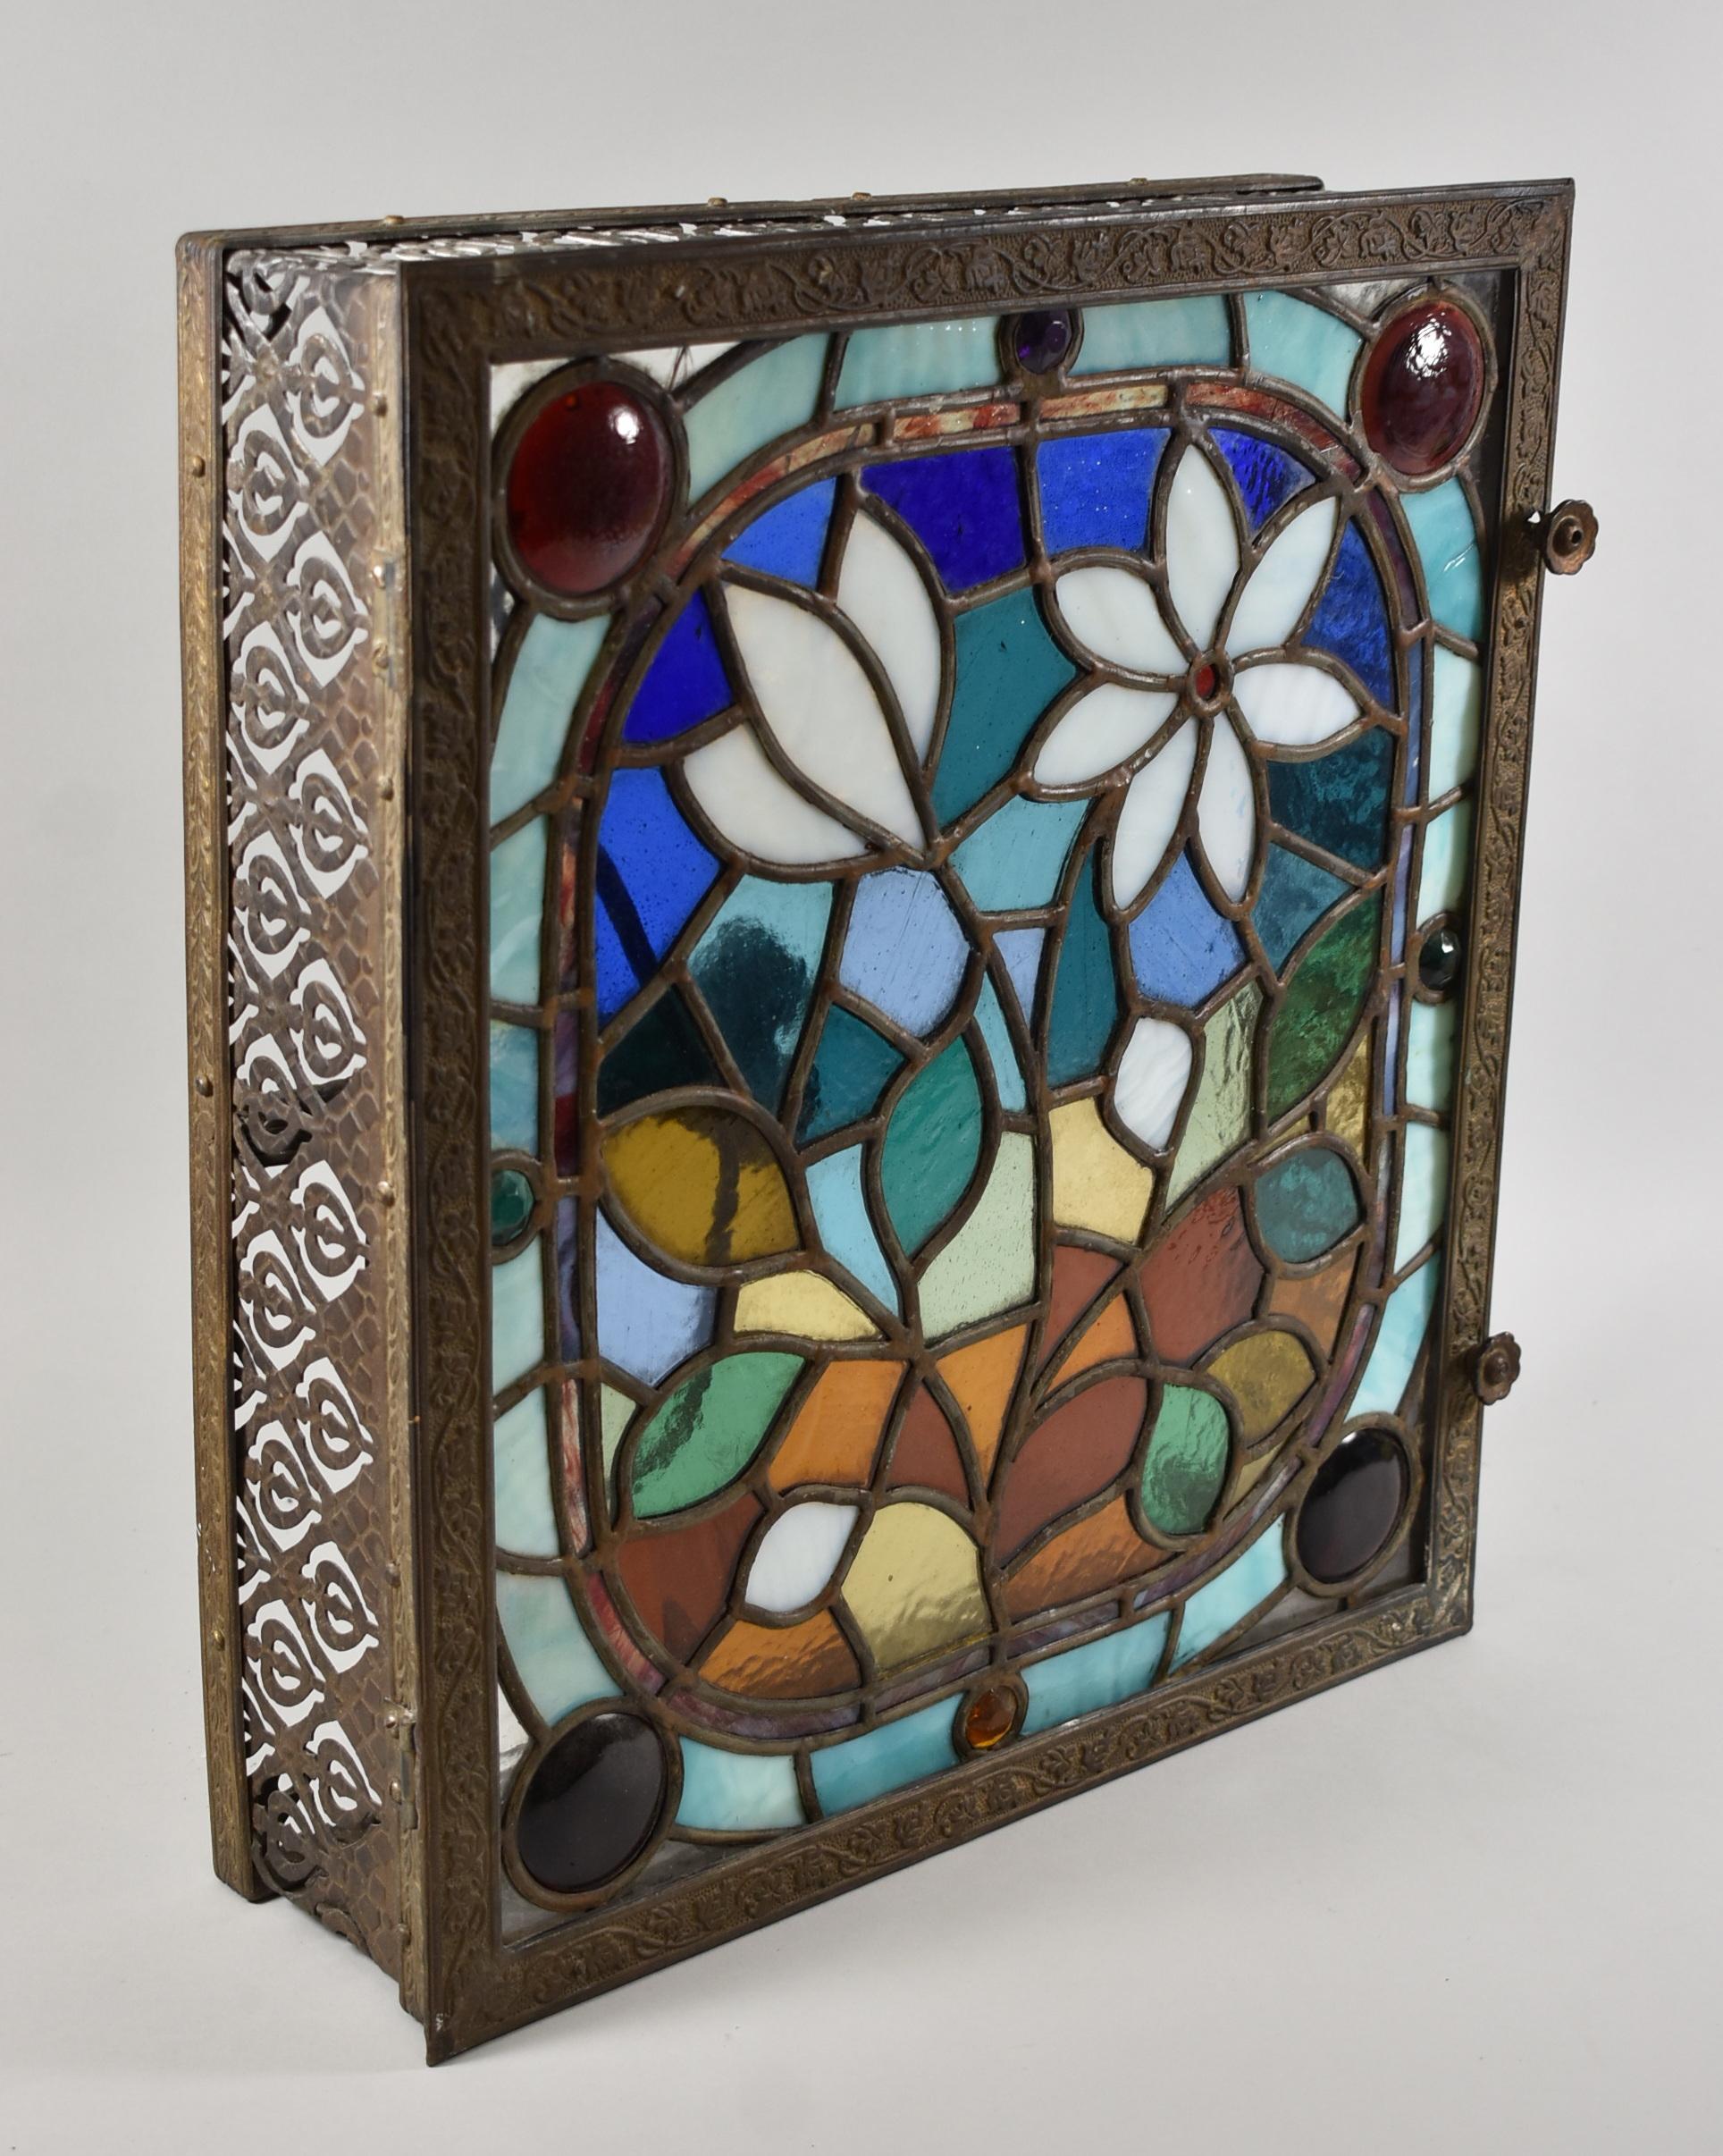 Antique stained glass ceiling light or wall stained glass panel. Faceted jewels and rondels. Brass frame is hinged for access. One socket. One small corner crack. Measures: 4.25